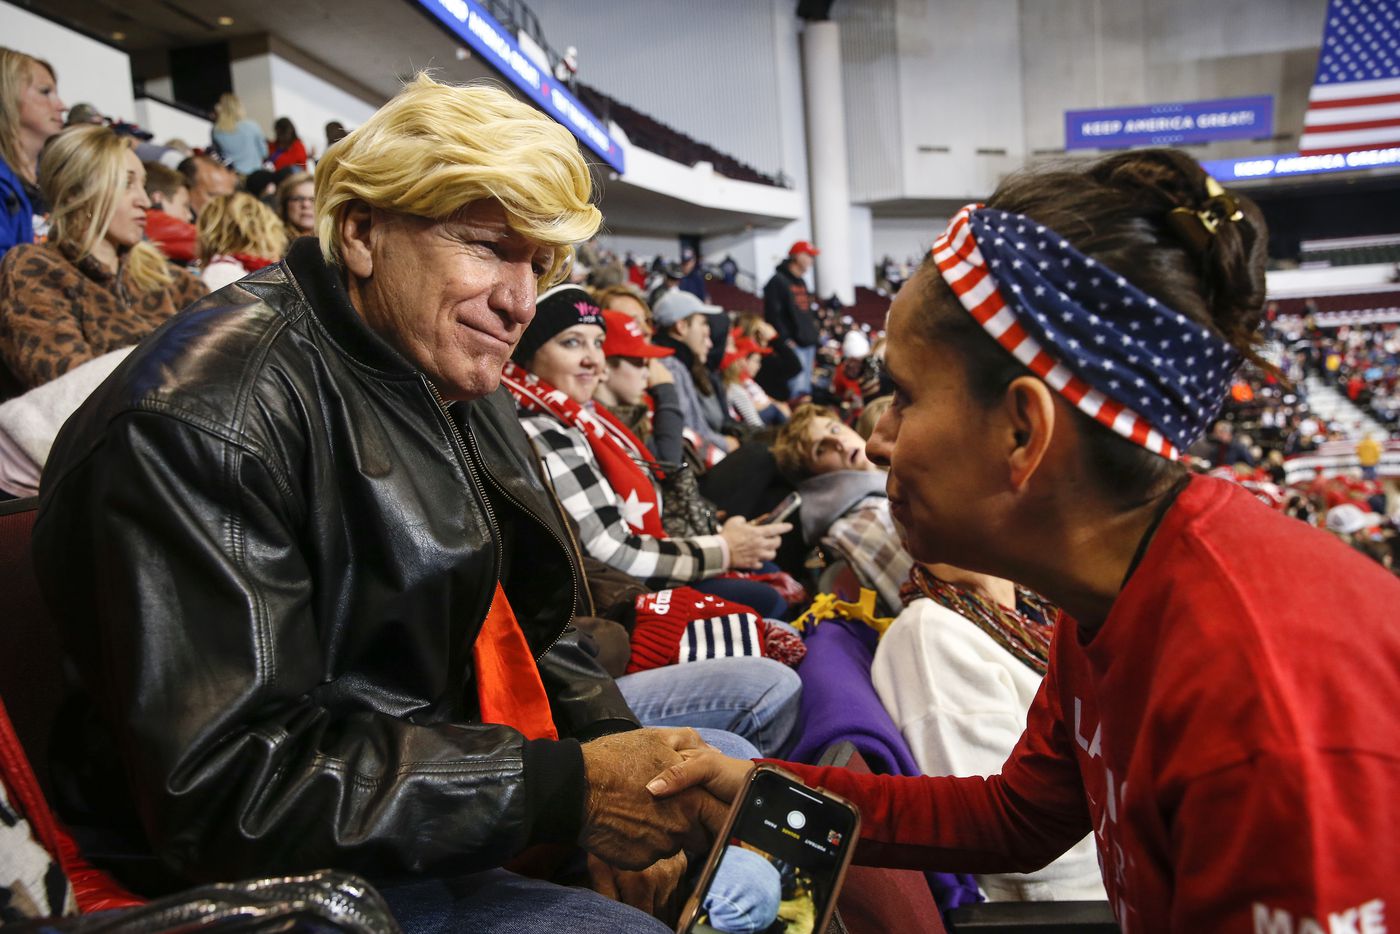 Martha Doss greets Eddie Barnes of Haughton, La., dressed in a Trump wig at a rally to reelect President Donald Trump in Bossier City.